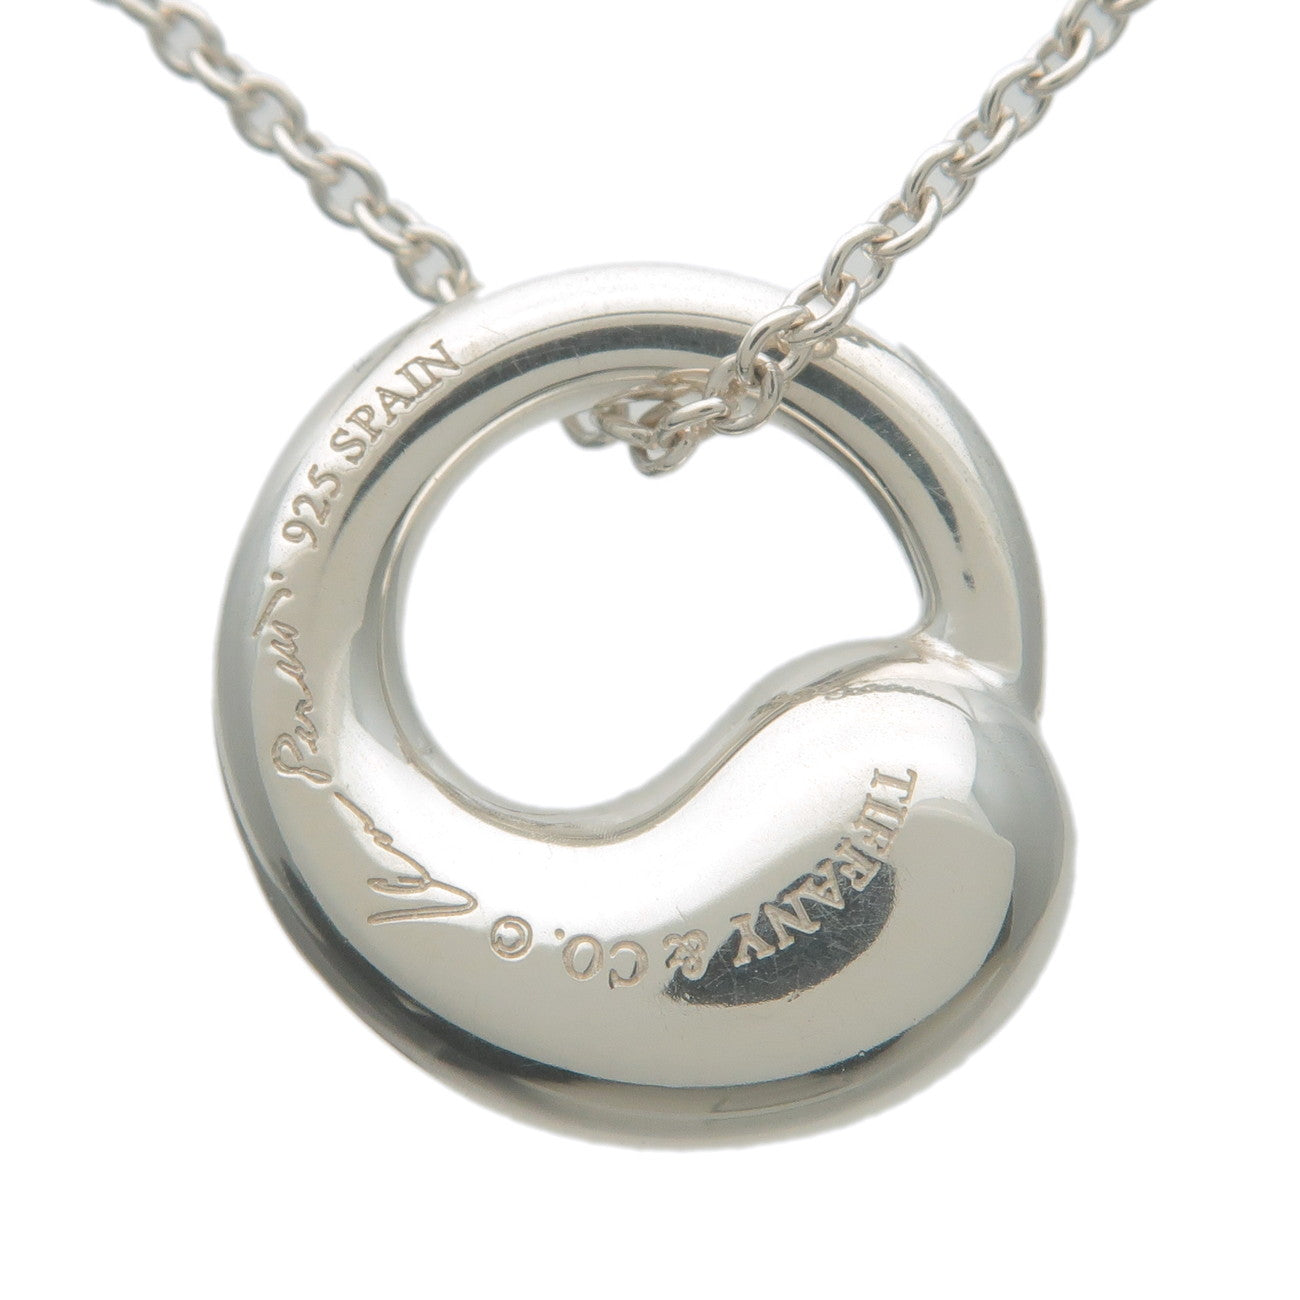 Tiffany&Co. Eternal Circle Necklace SV925 Silver 925